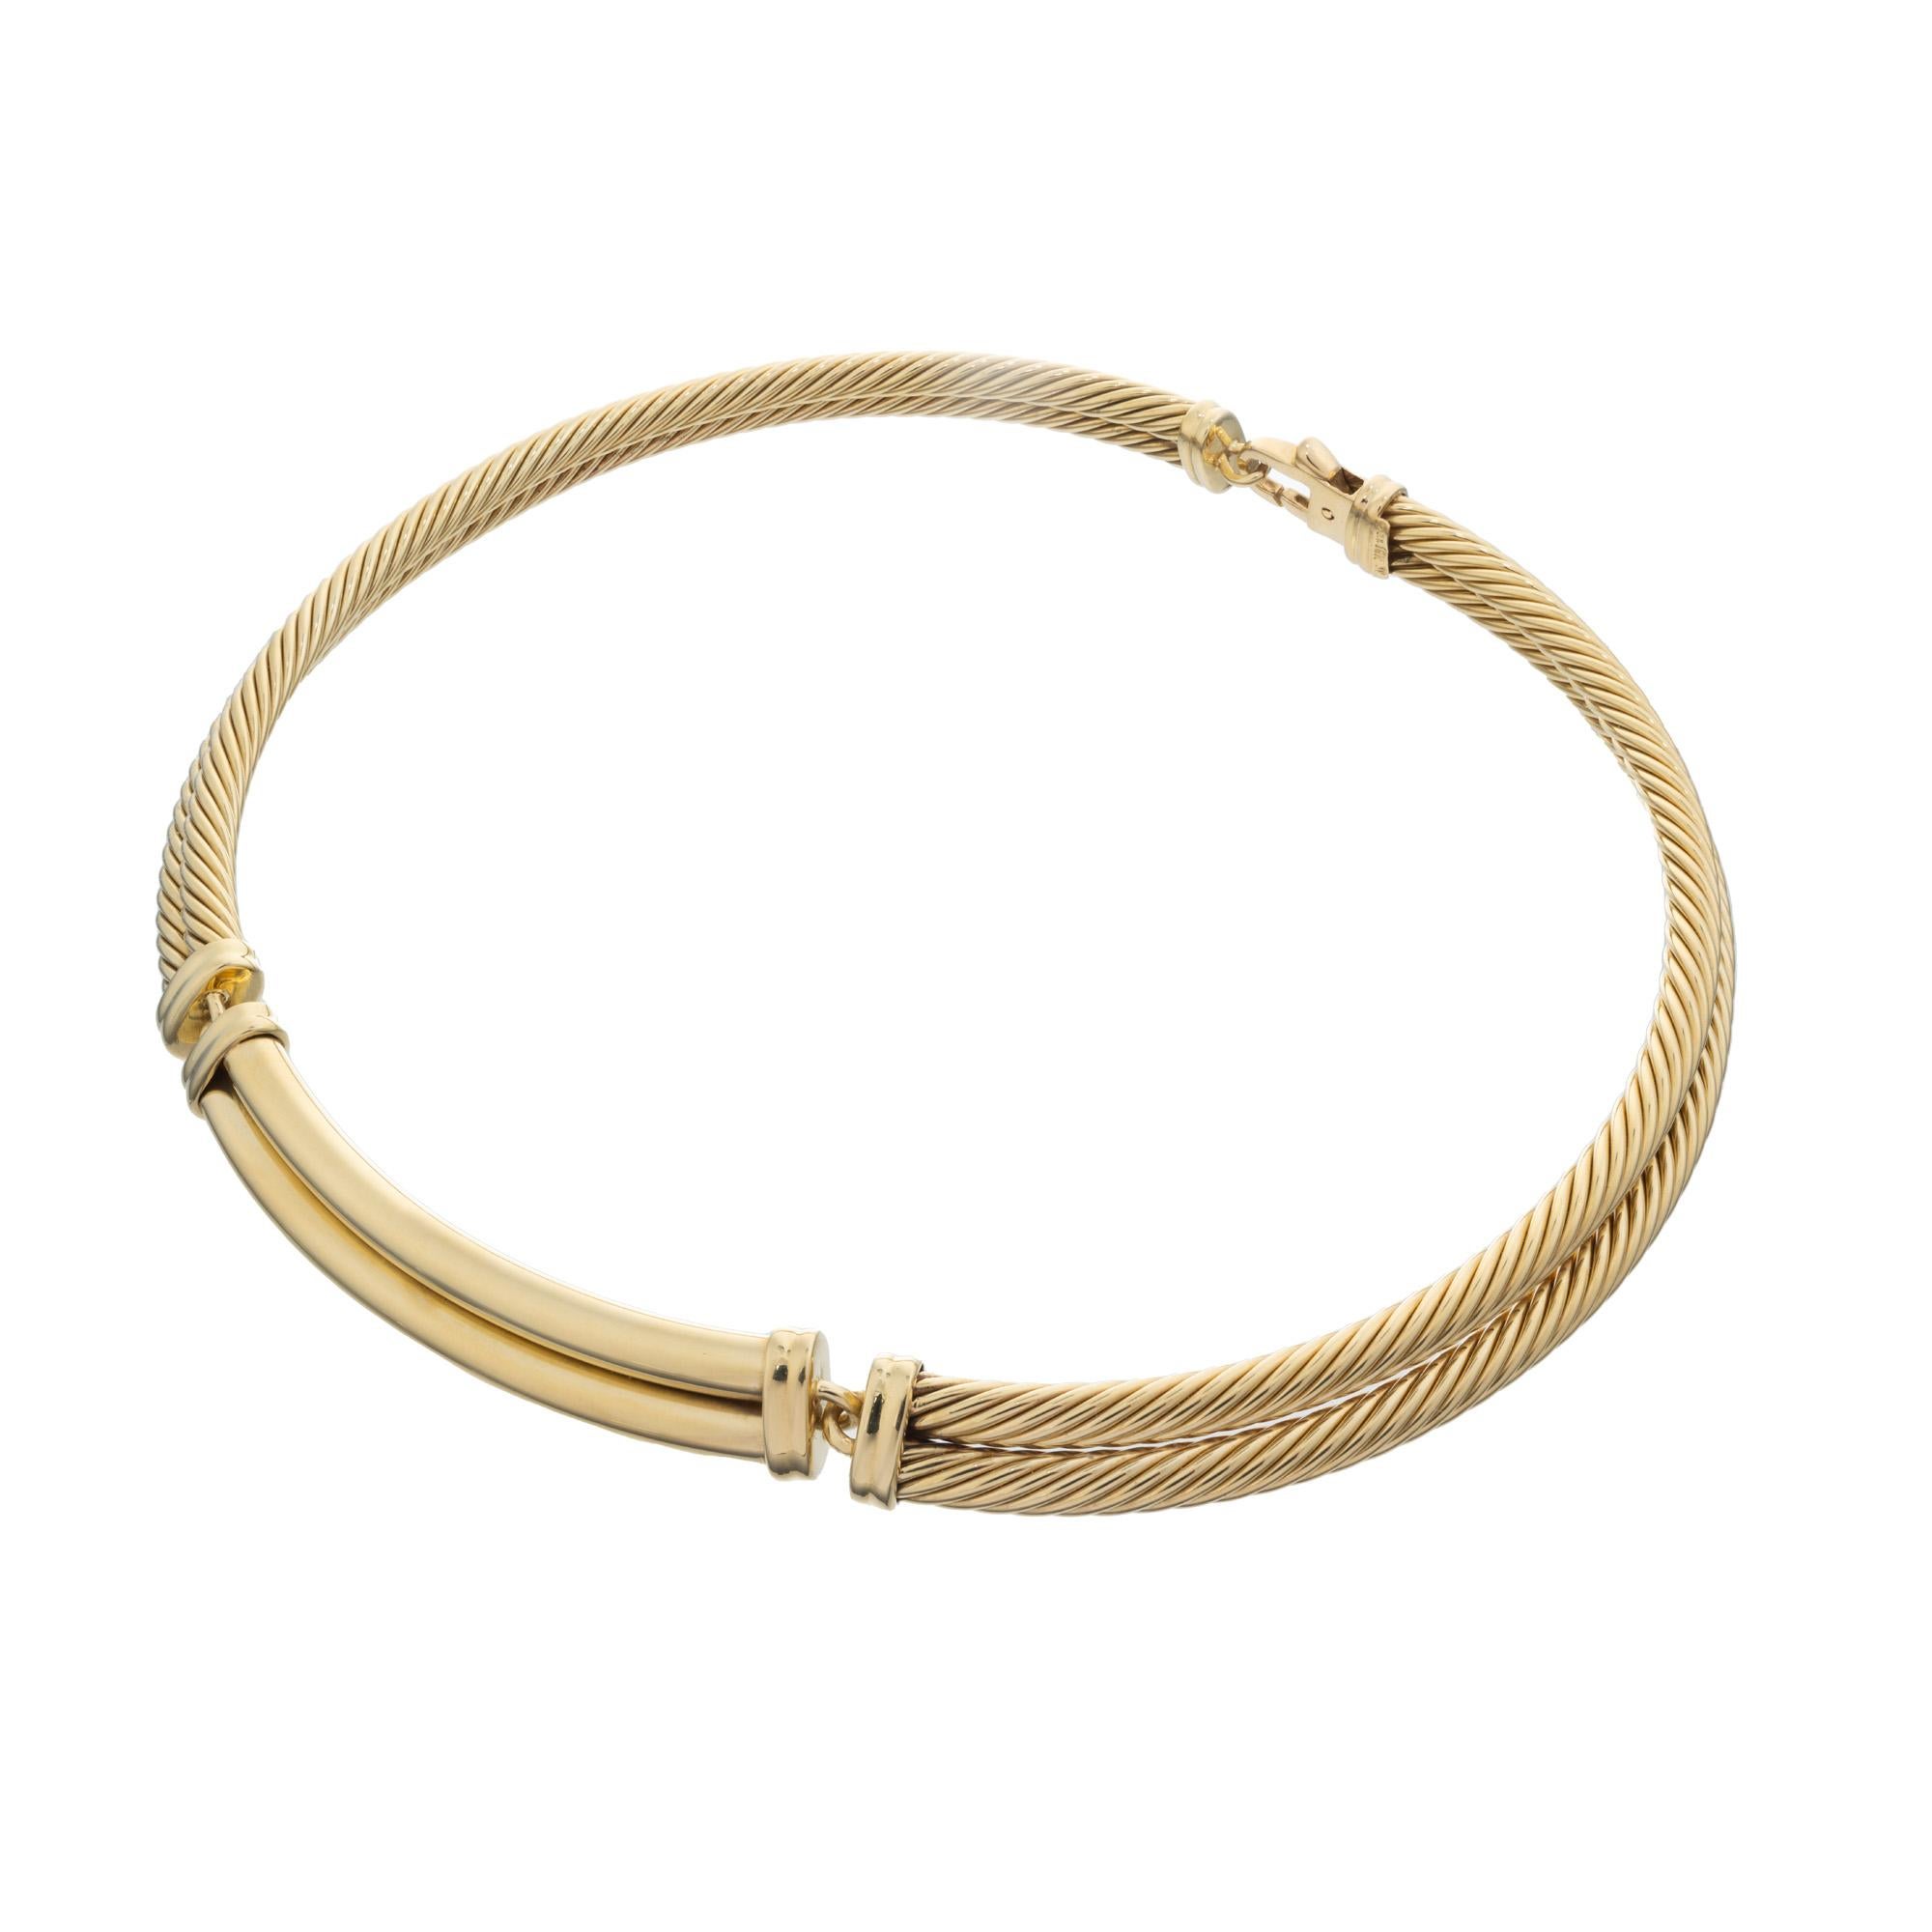 This David Yurman Yellow Gold Two Row Twisted Cable Necklace is a stunning piece that effortlessly combines elegance with modernity. Crafted in 18K yellow gold, this necklace features a unique twisted cable design that adds depth and dimension to